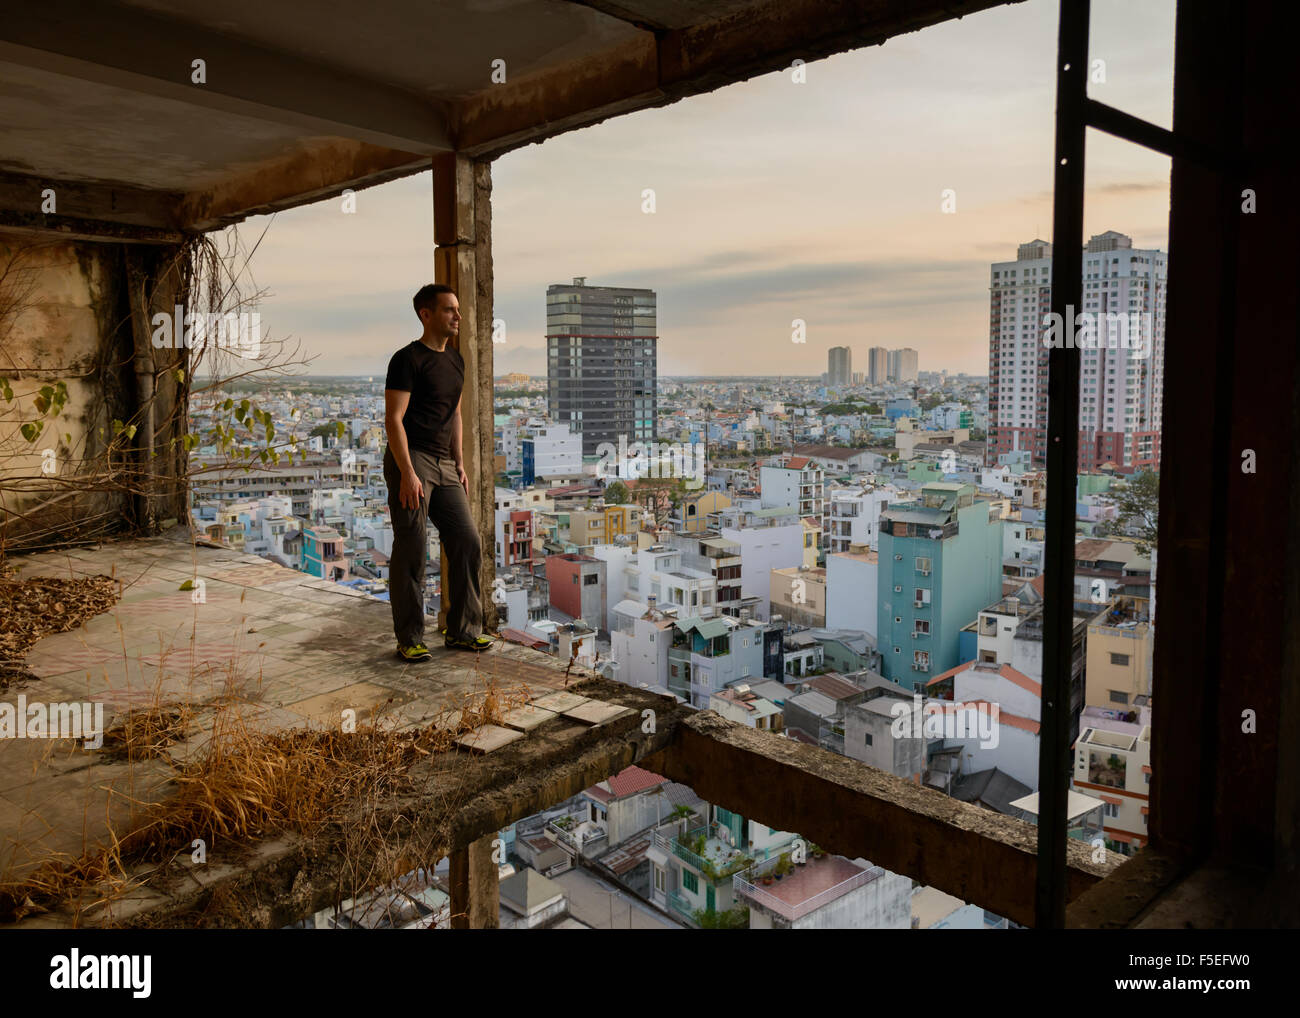 Man standing in derelict building looking at city, Ho Chi Minh, Vietnam Stock Photo